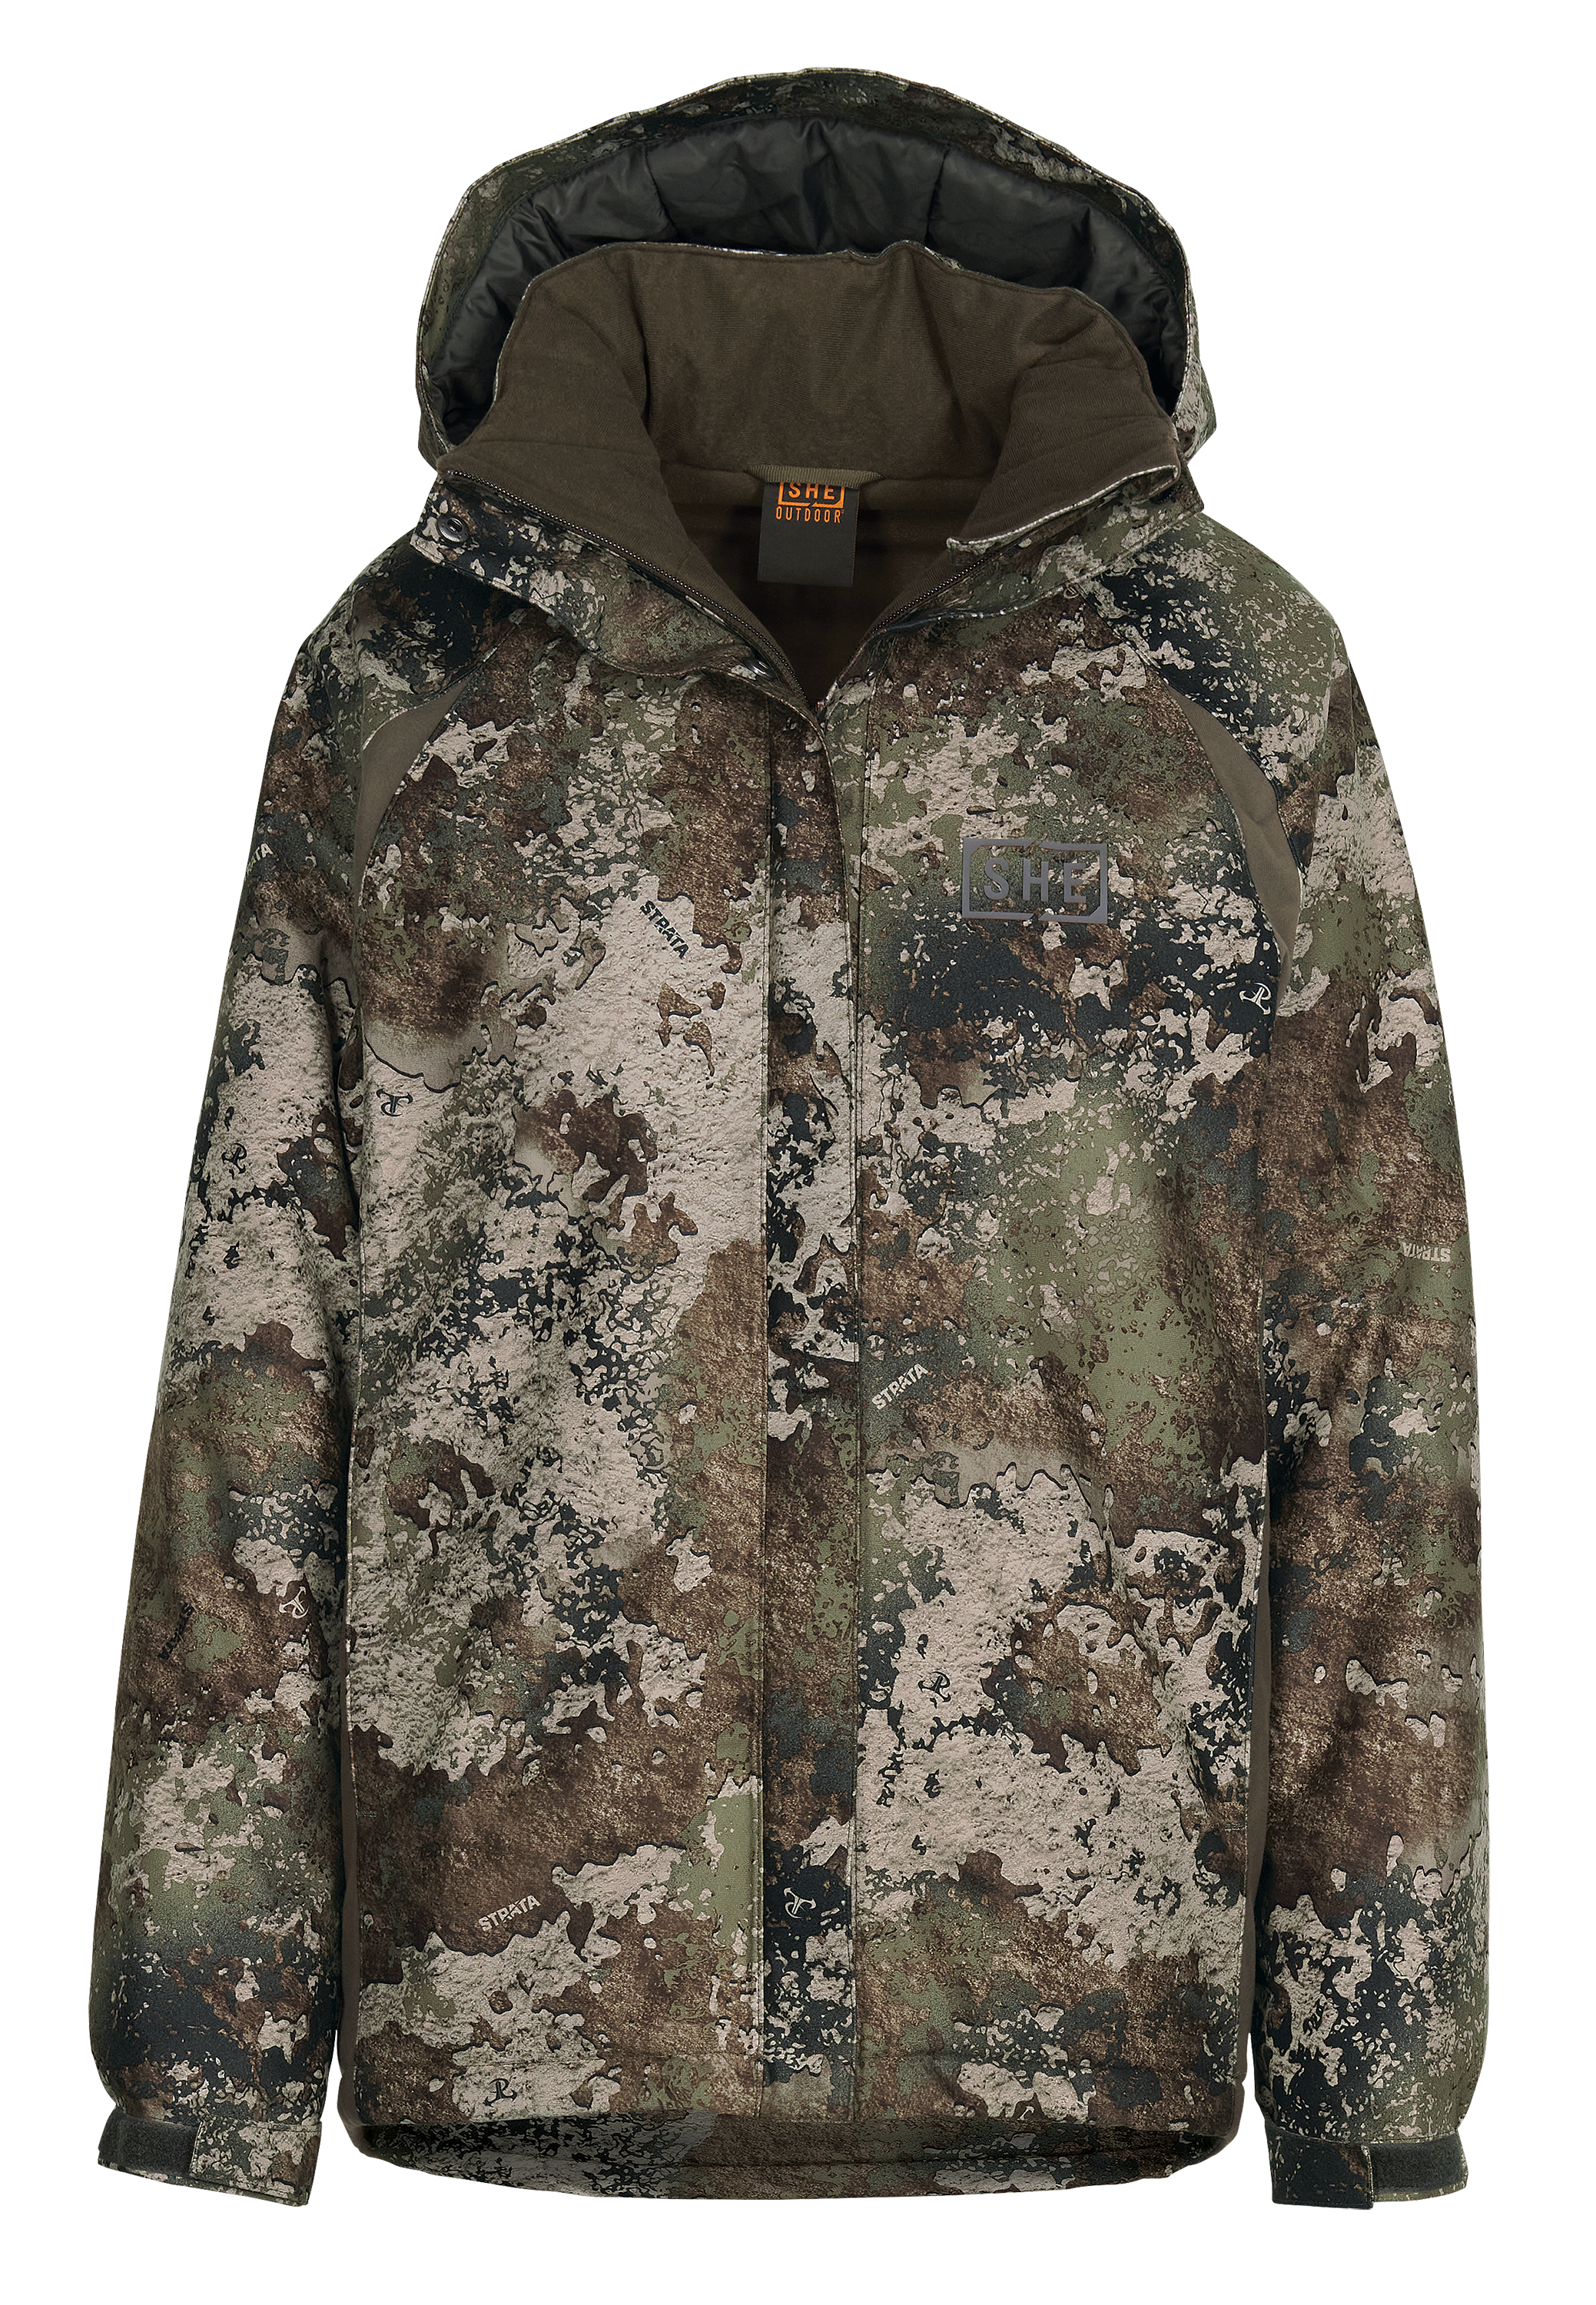 She Sentry Insulated Waterproof Jacket for Ladies - TrueTimber Strata - L